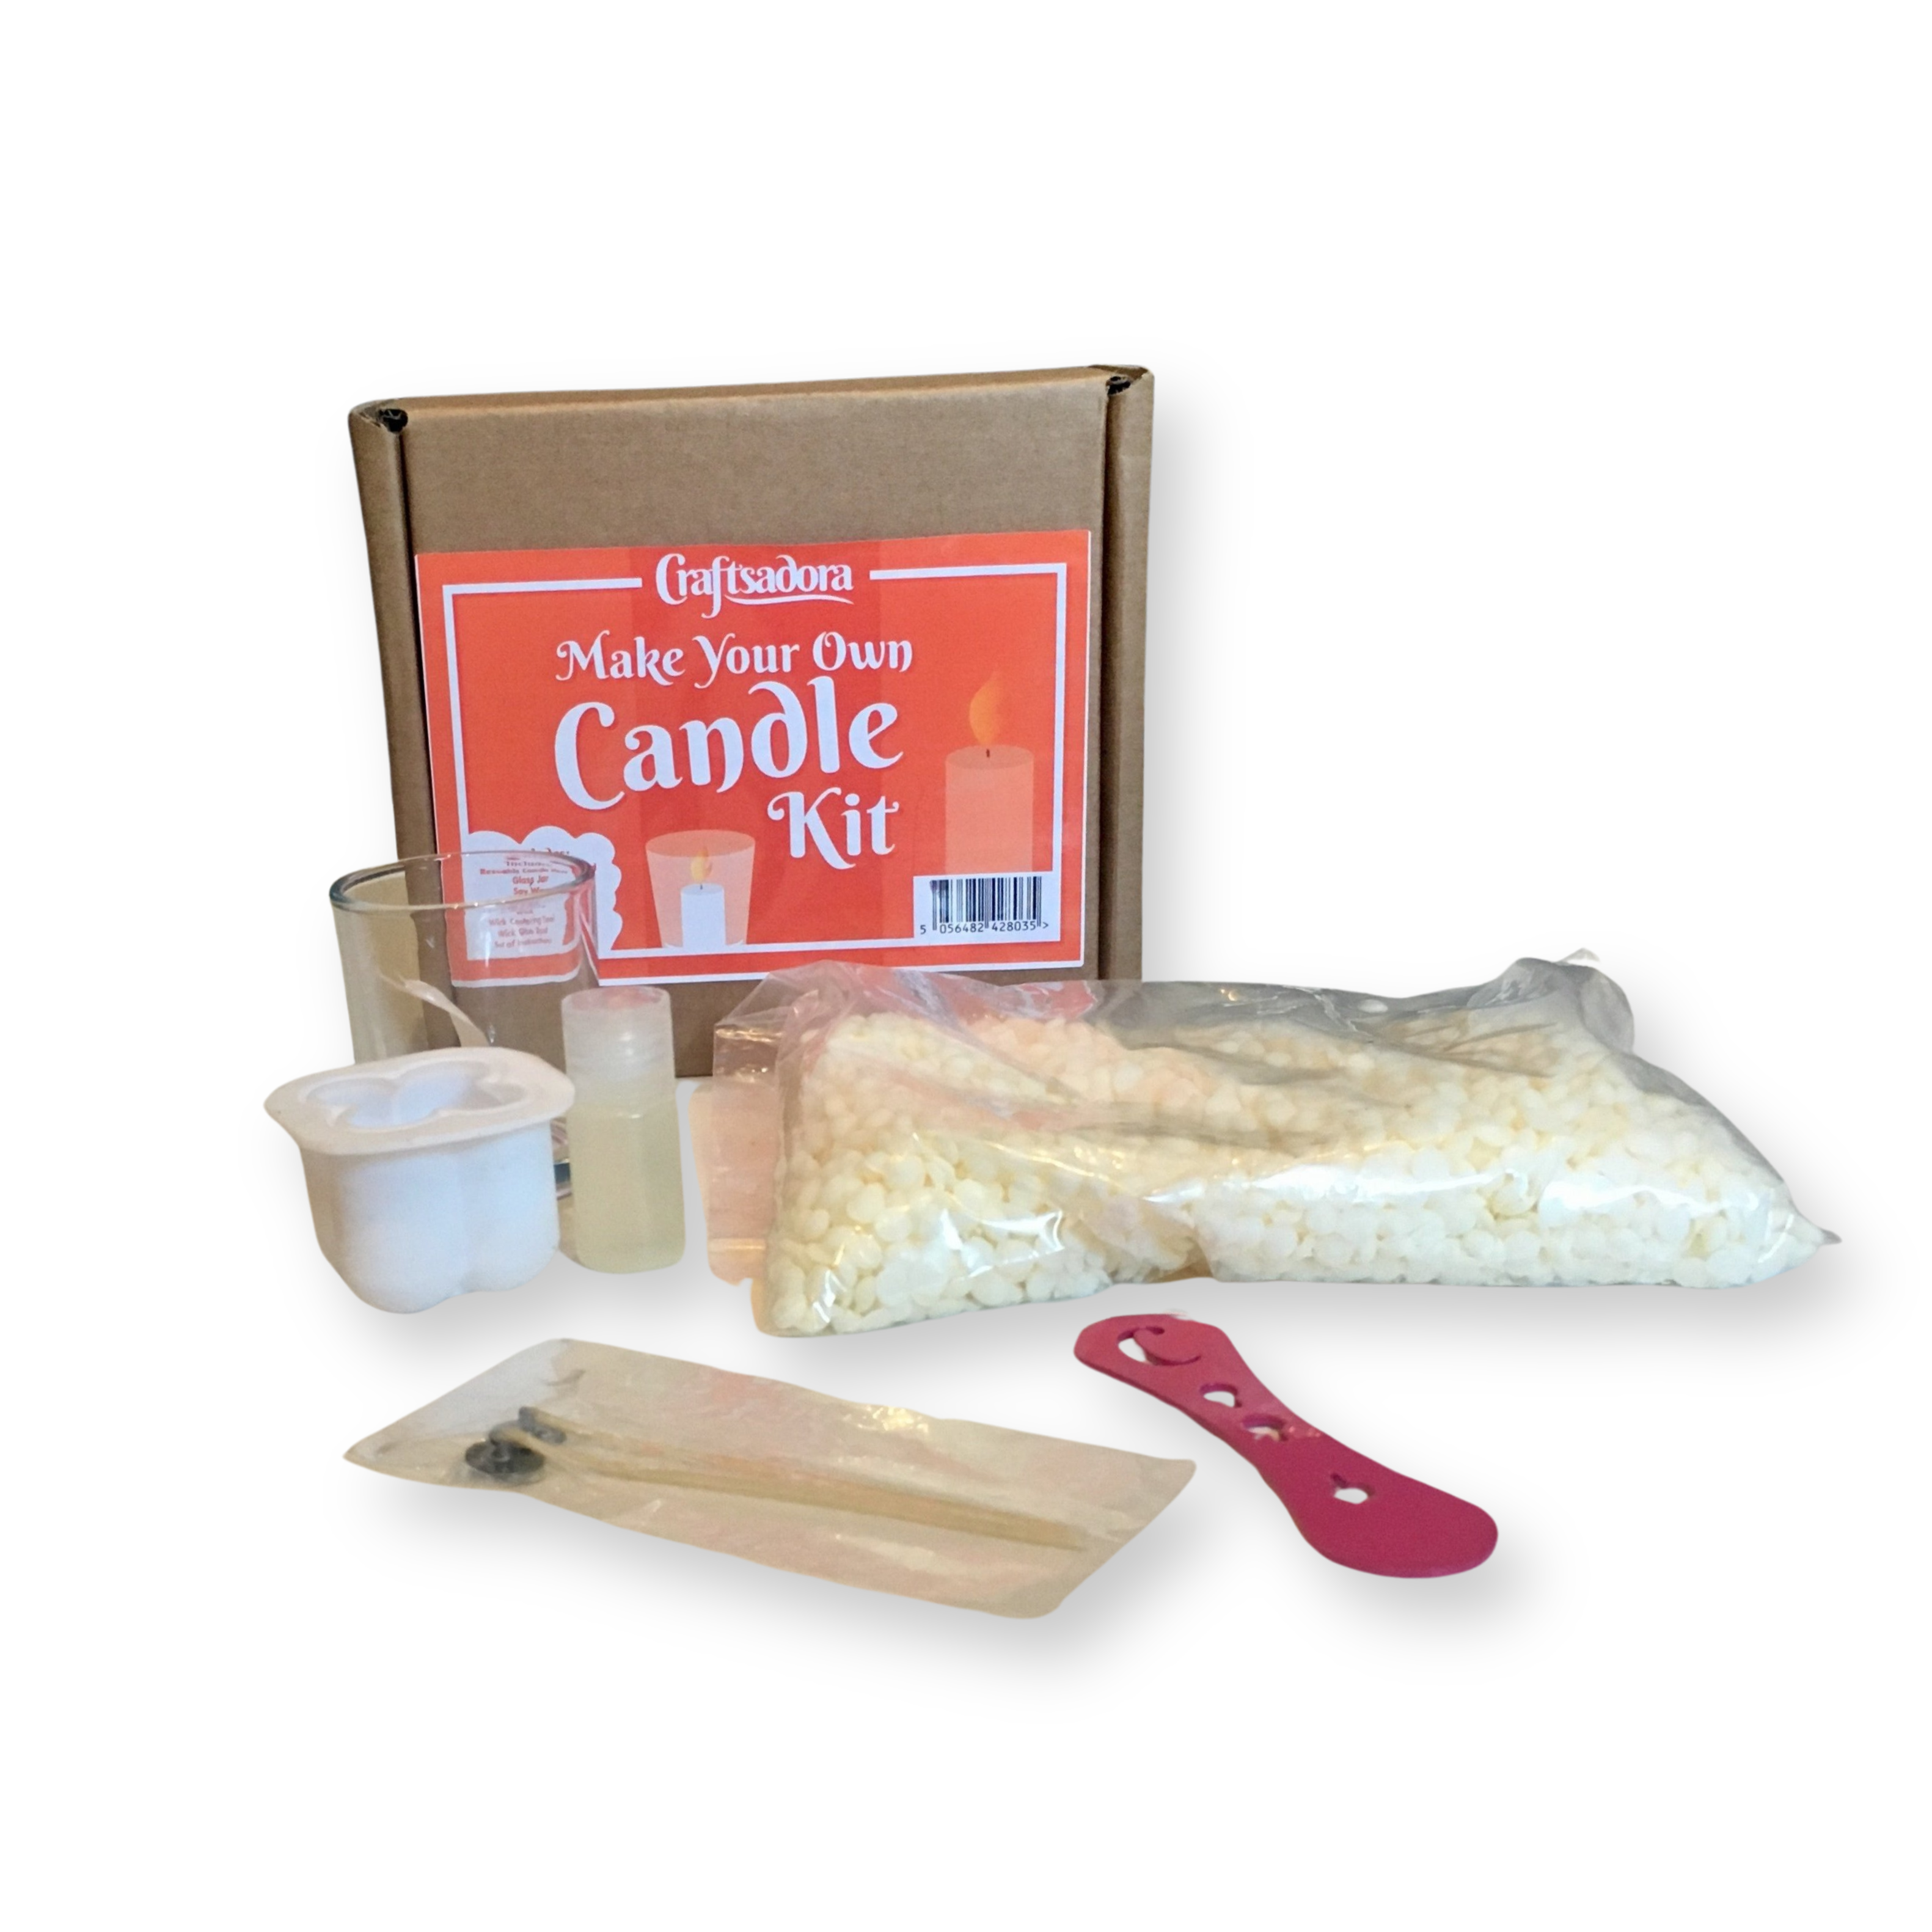 Craftsadora Make Your Own Candle Kit - Indoor Outdoors